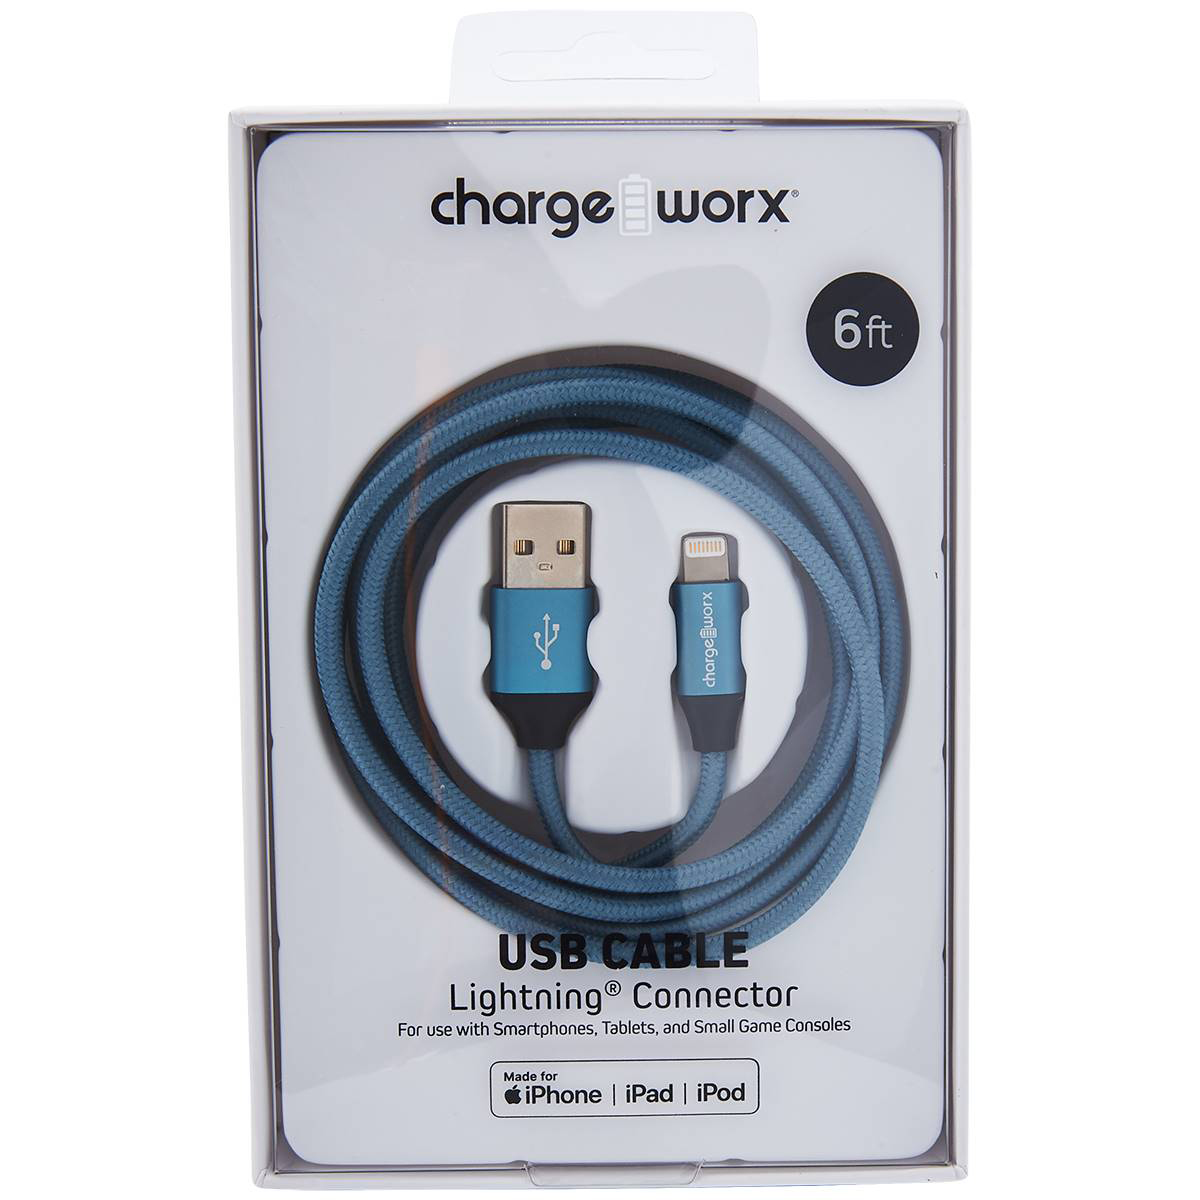 Charge Worx 6ft Lightning Cable